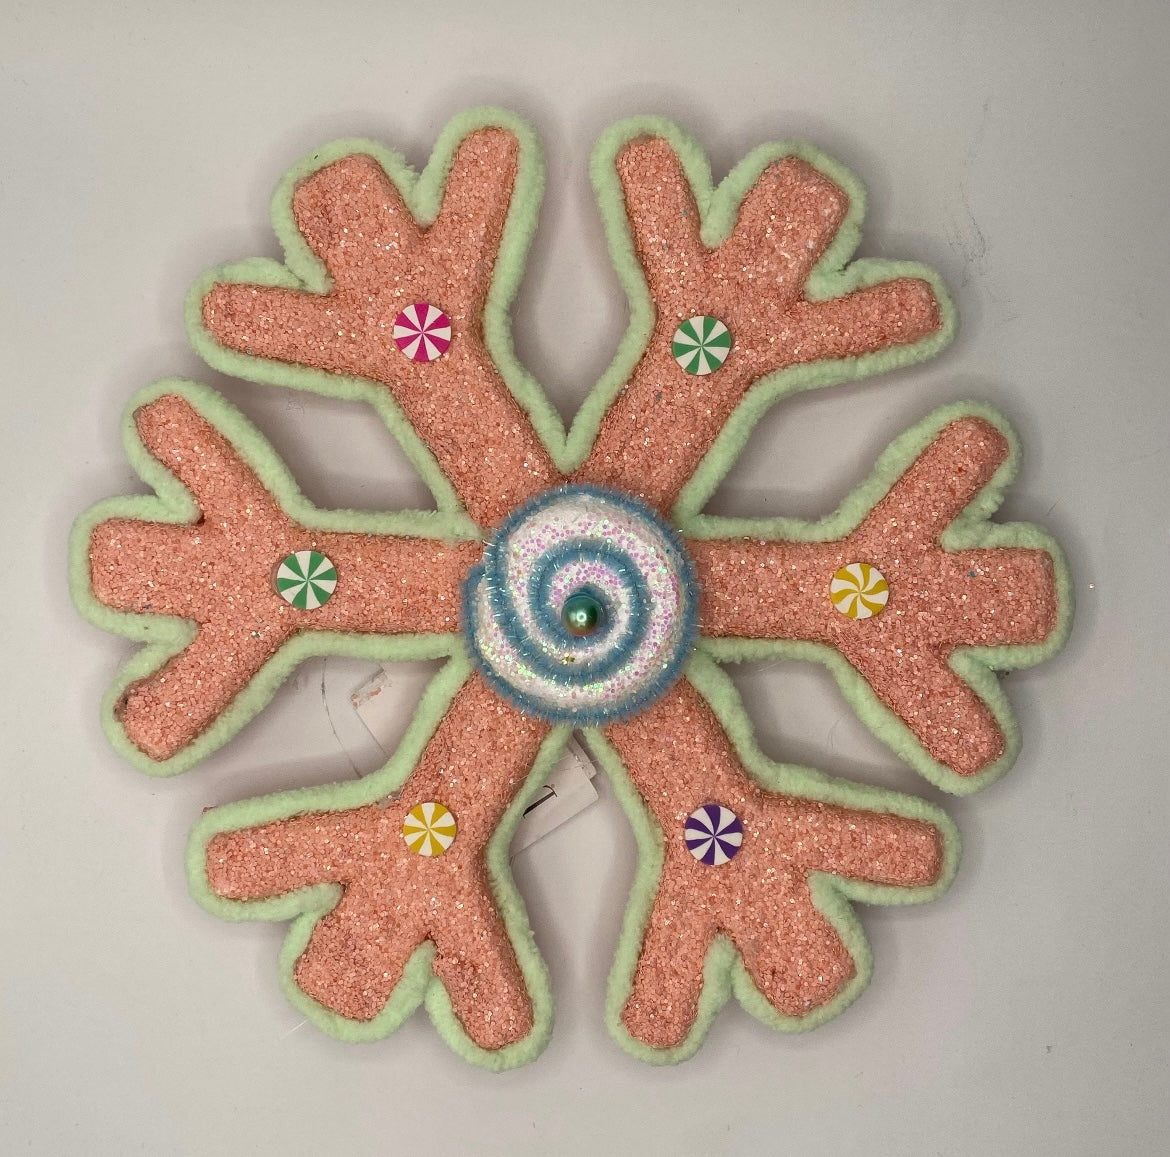 Large Candy Snowflake Ornaments no